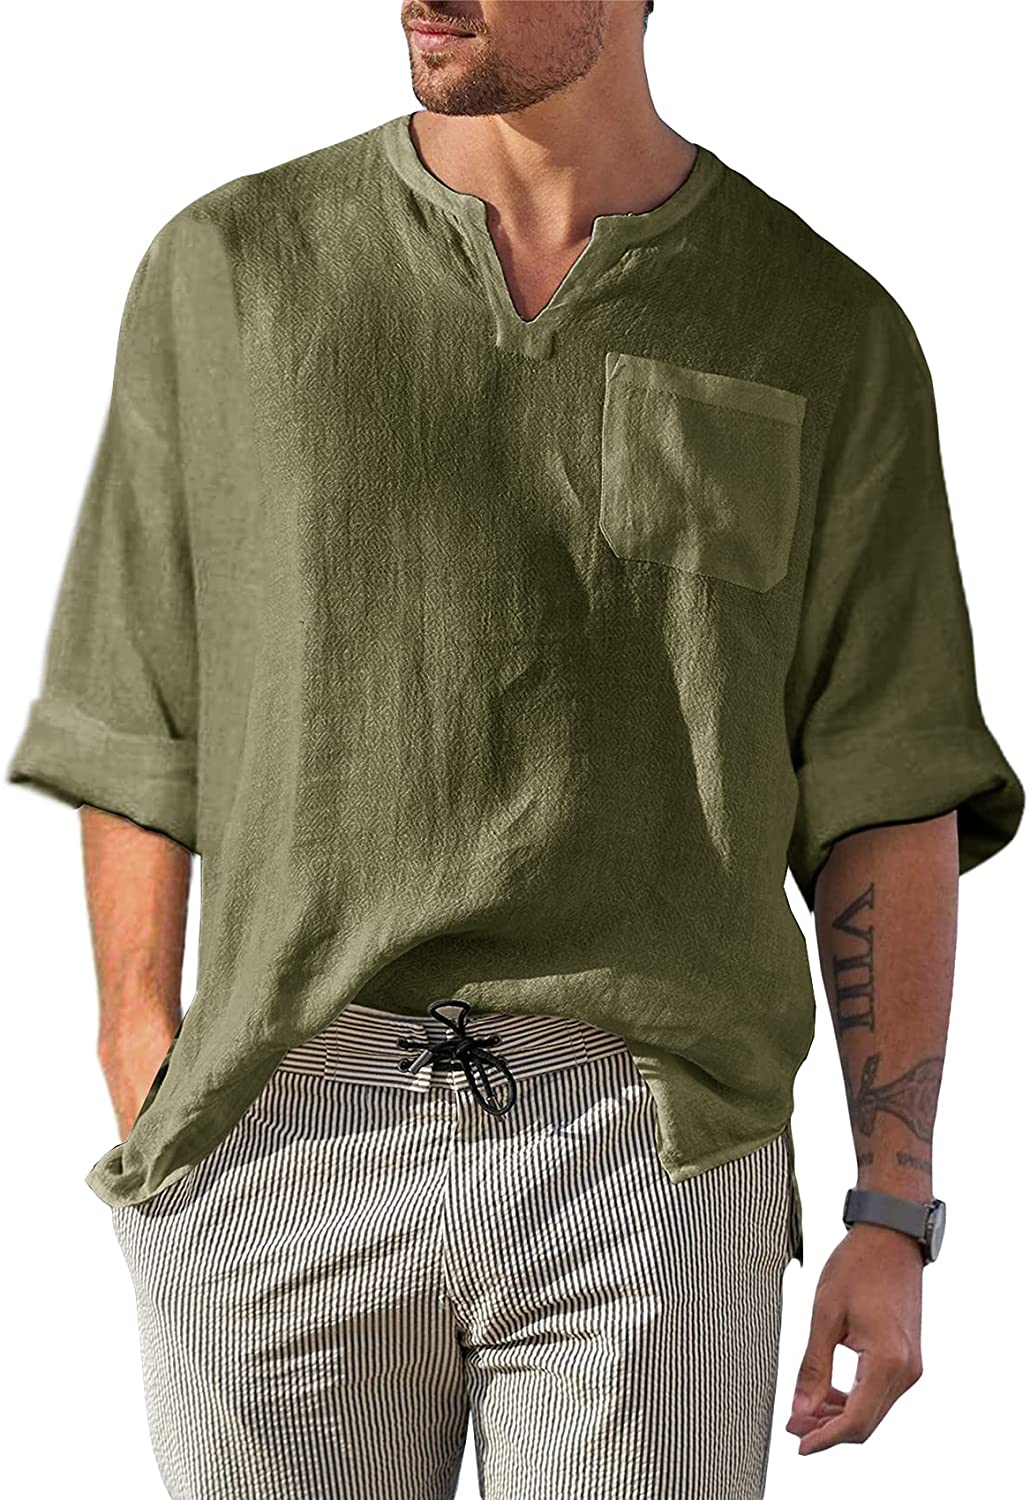 Men's Casual 3/4 Sleeve Linen Henley T-Shirt High Low Solid Casual Beach Yoga Top Loose Fit Hippie Shirts 